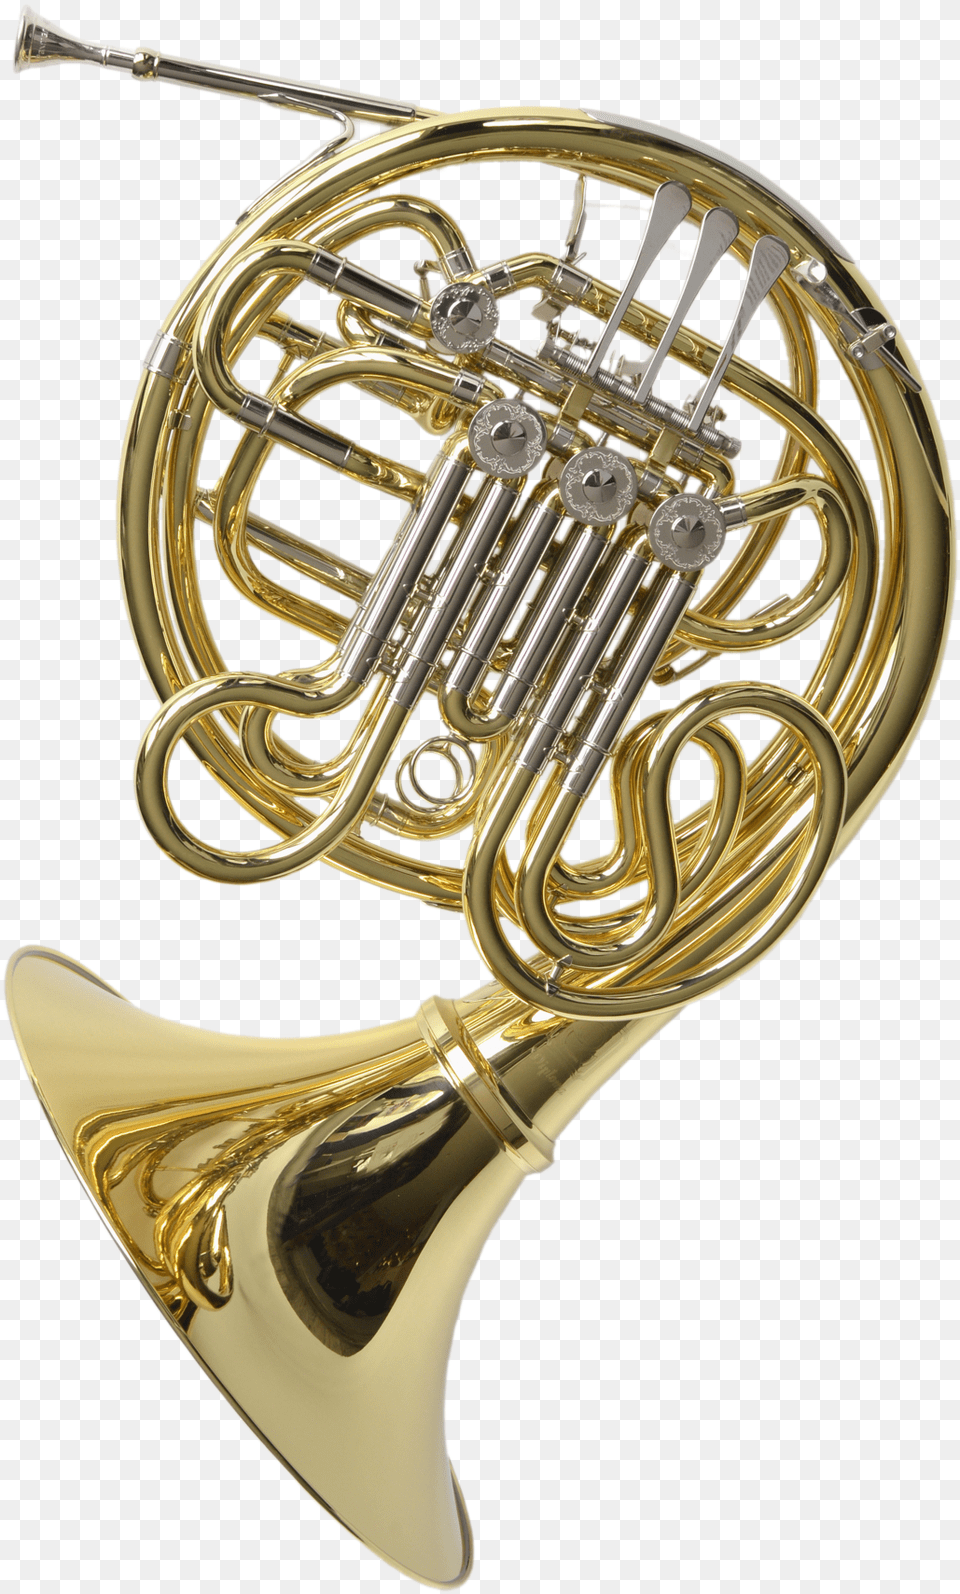 Paxman Diploma French Horn, Brass Section, Musical Instrument, French Horn, Smoke Pipe Png Image